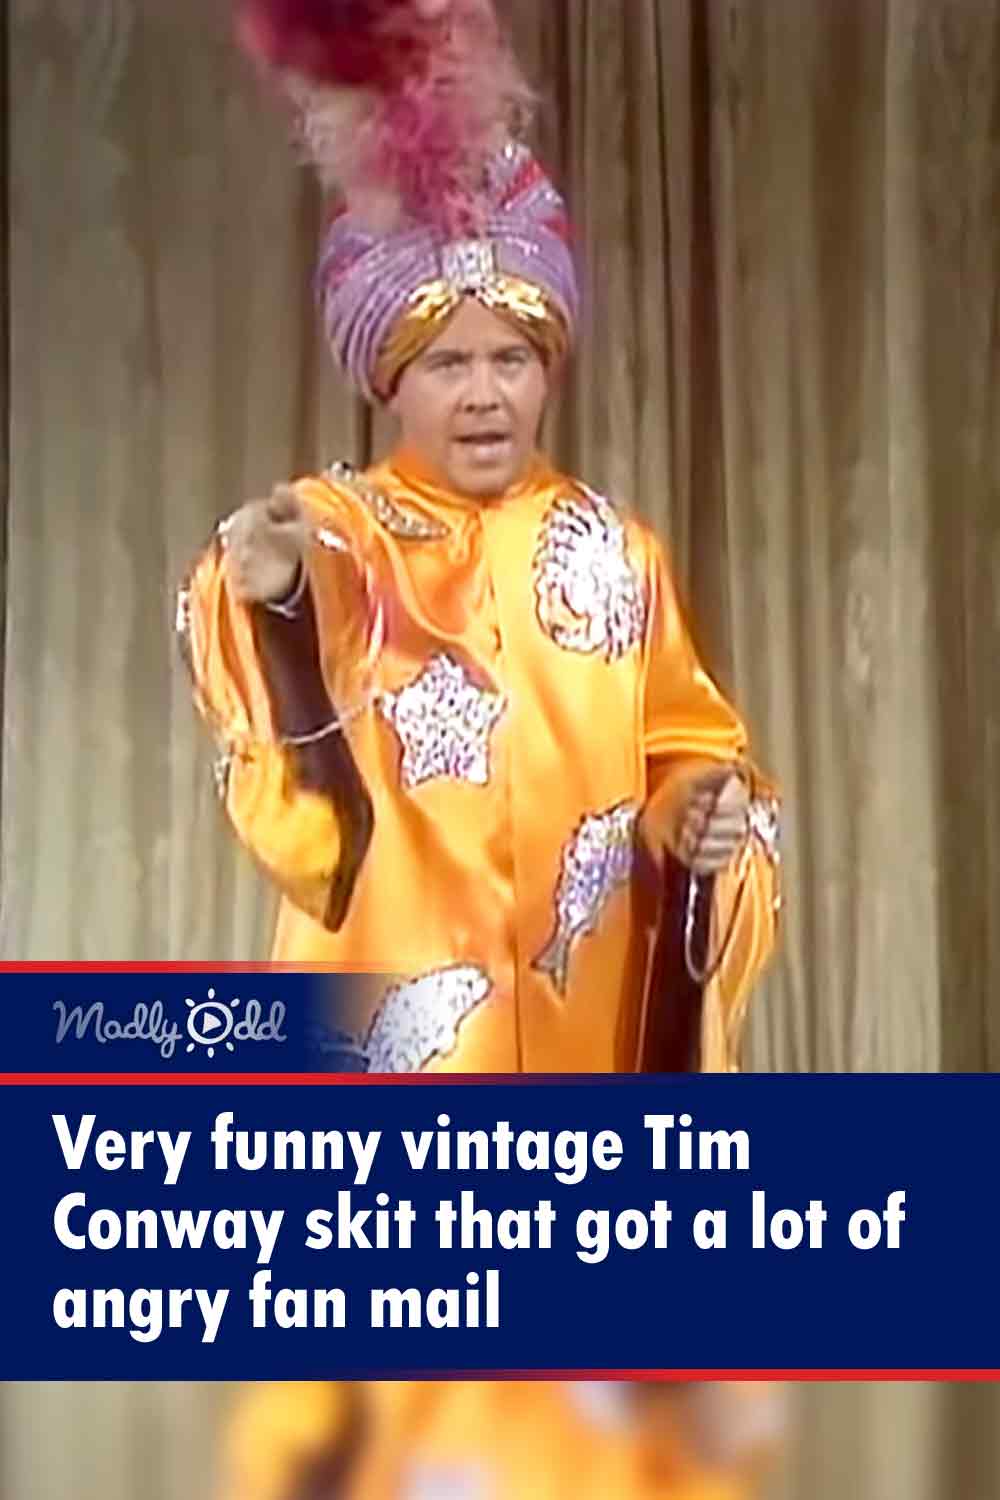 Very funny vintage Tim Conway skit that got a lot of angry fan mail